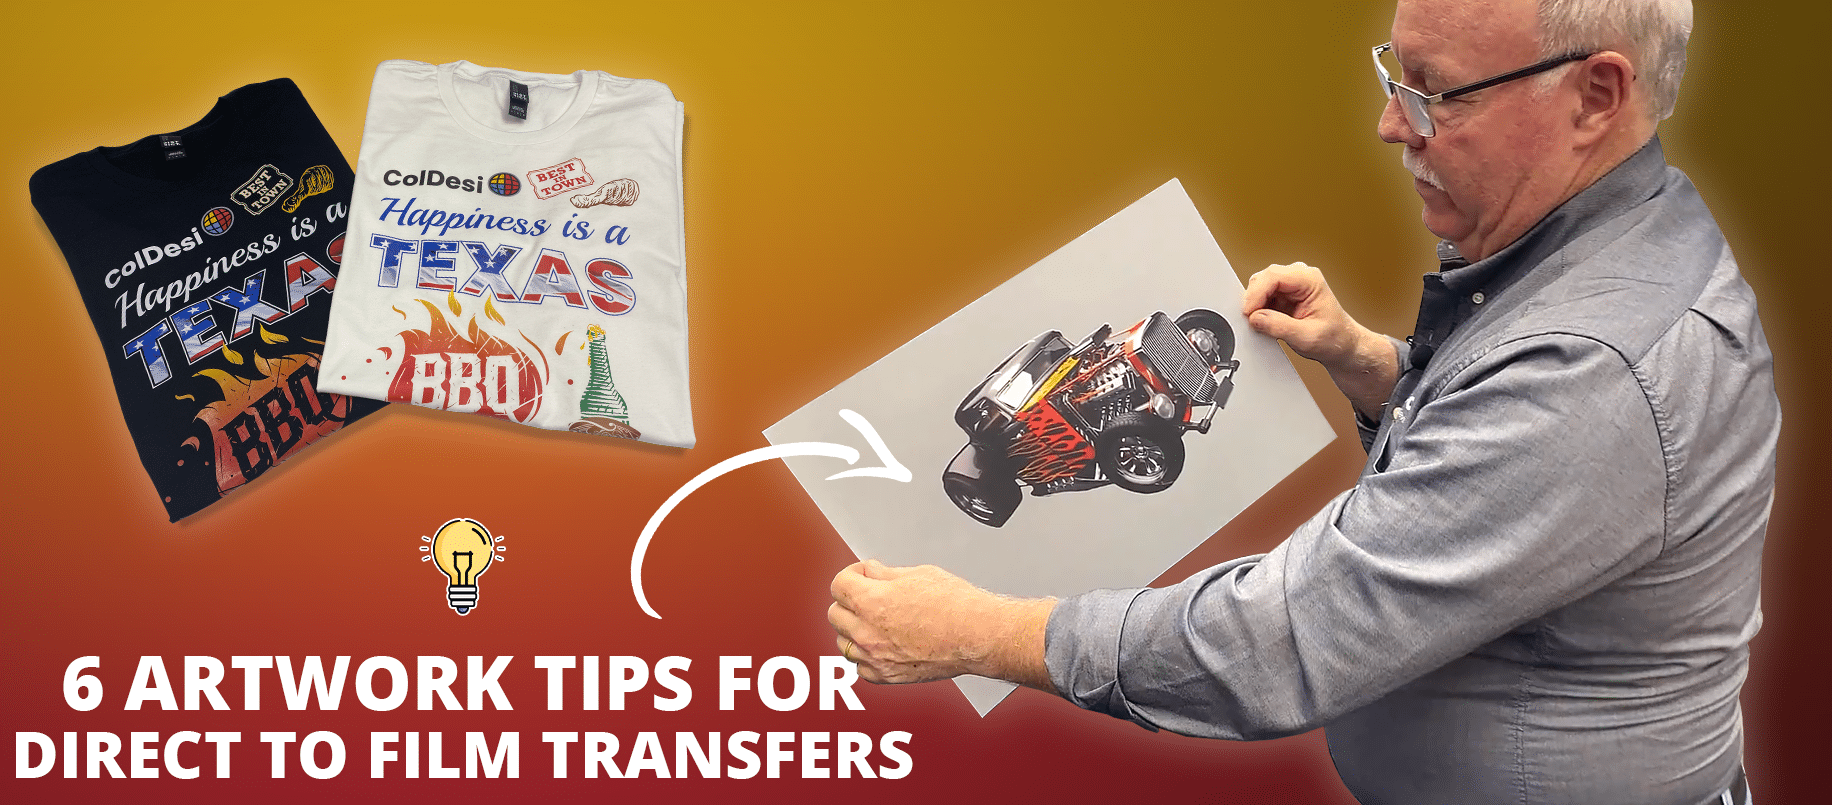 The Truth About Direct to Film Printers and Transfers - Transfer